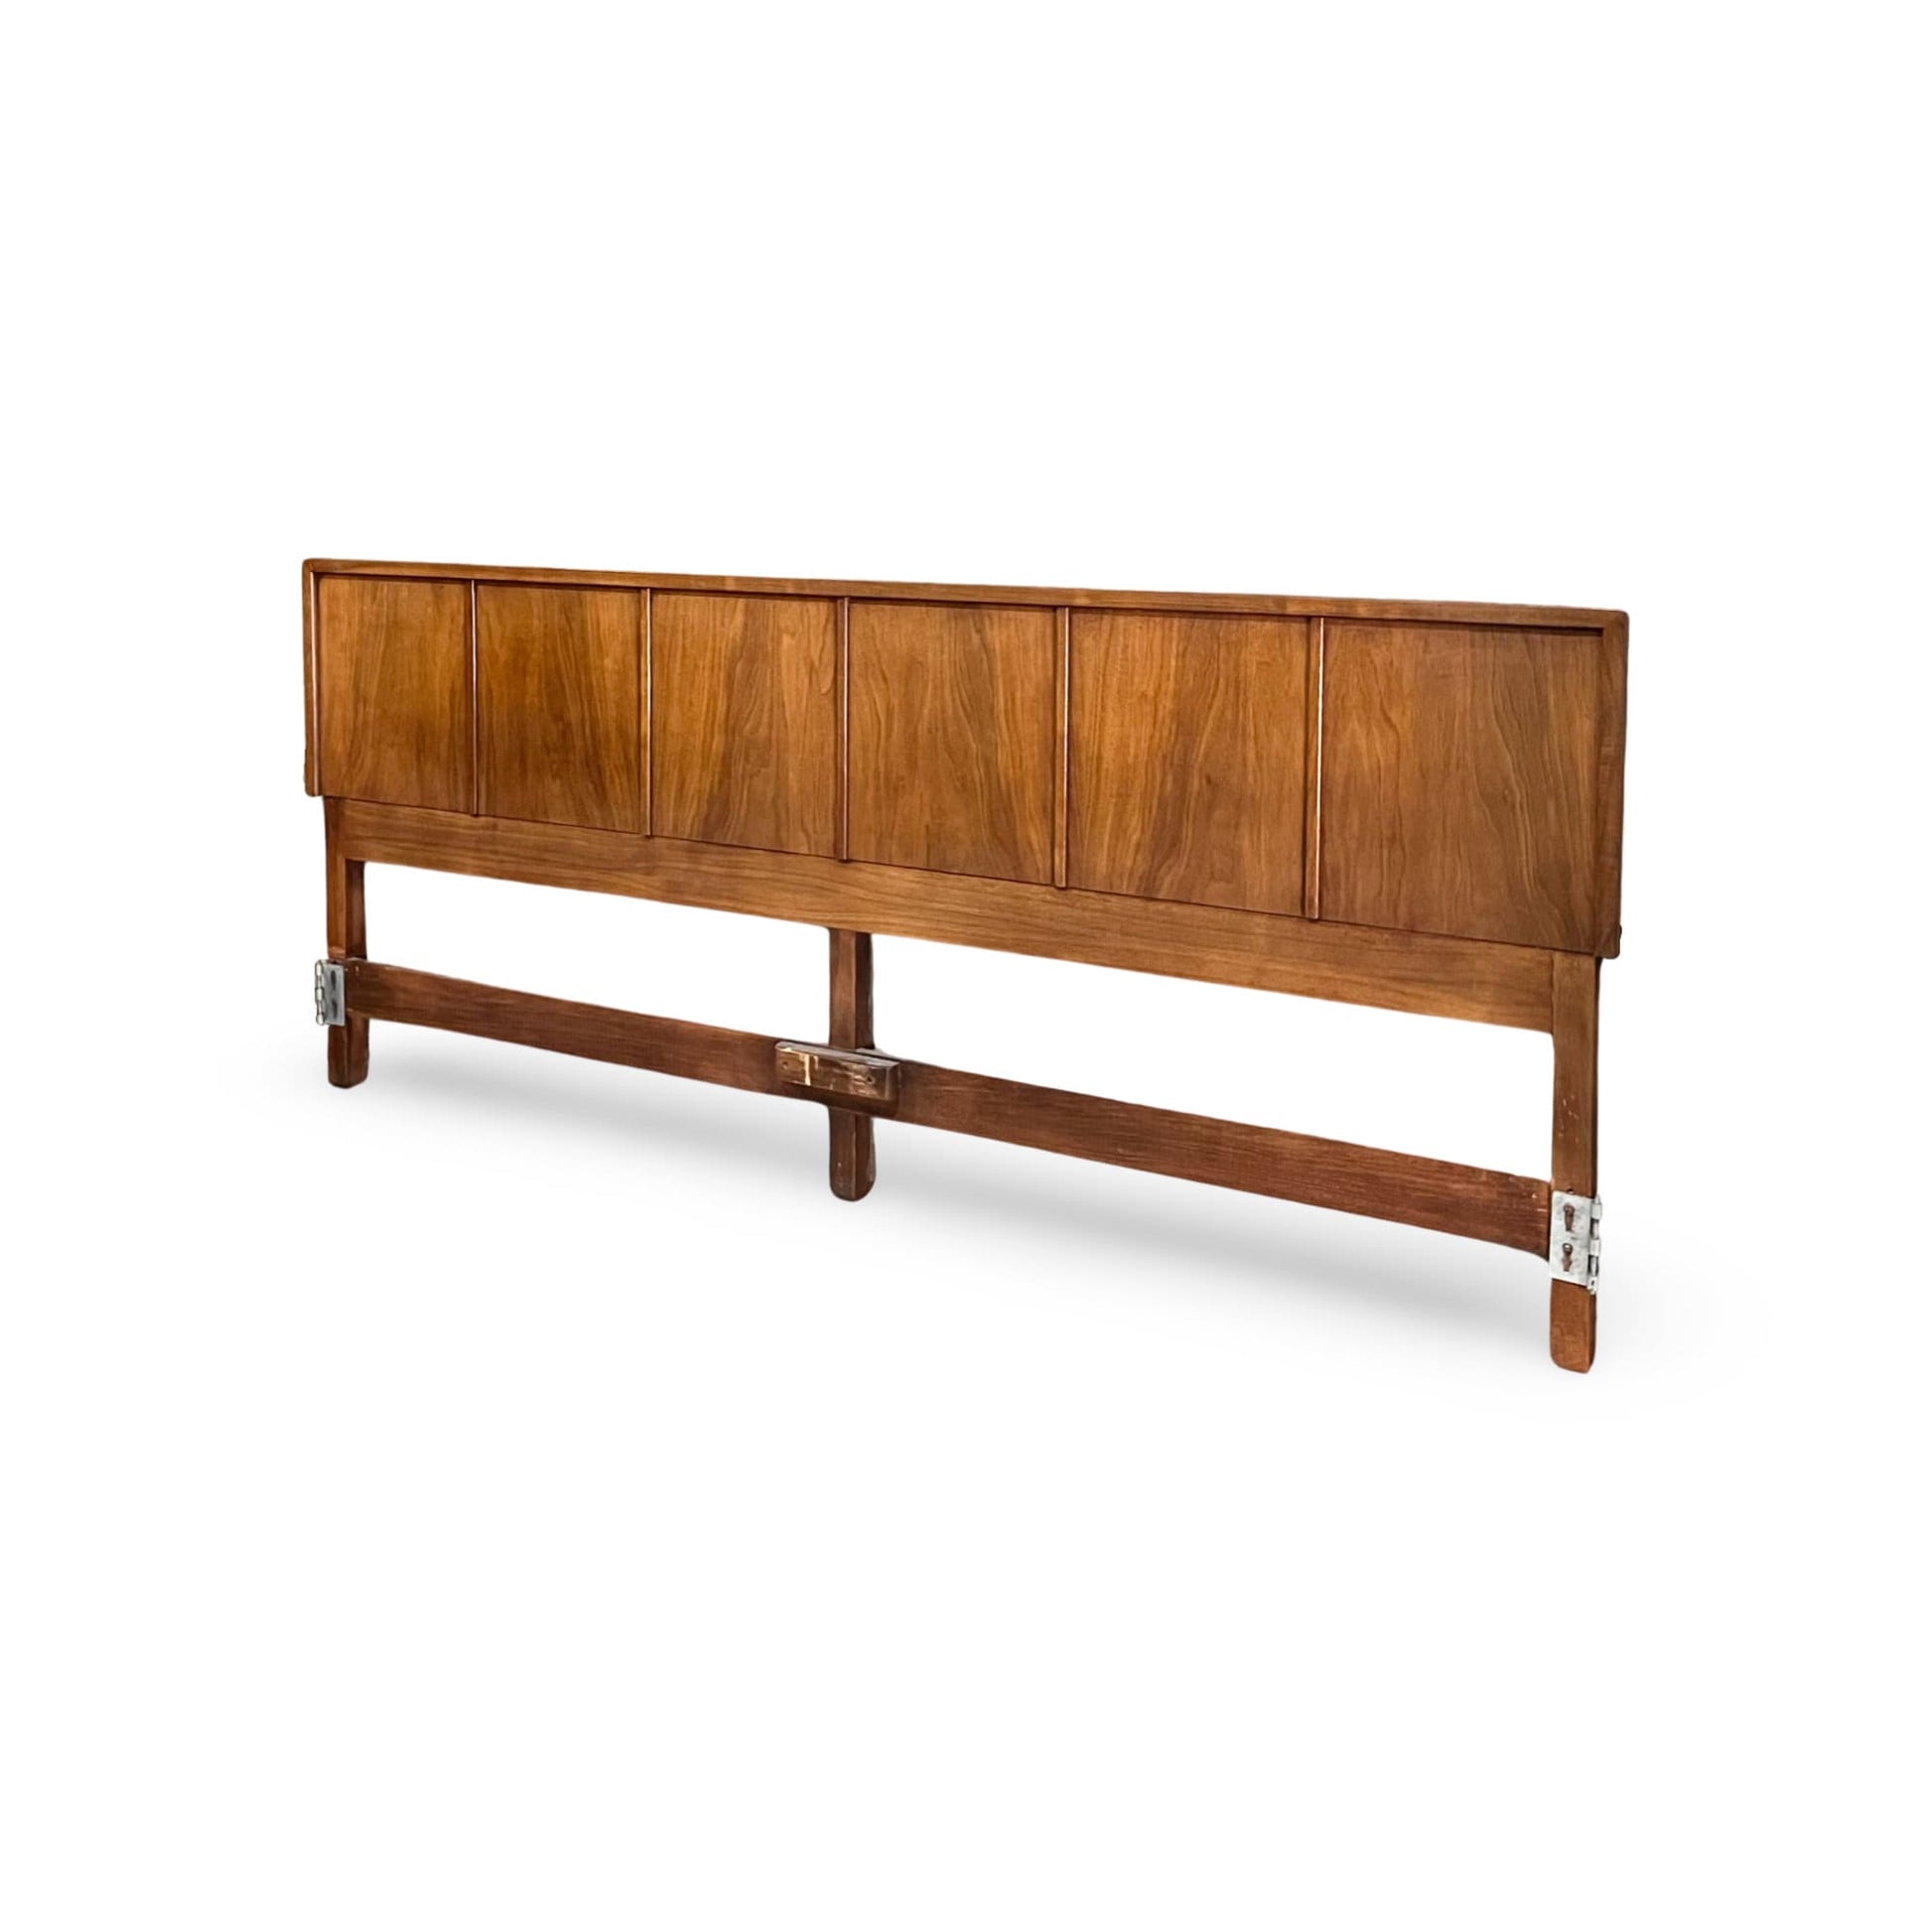 Sleek king-size headboard and dressers with minimalist design, ideal for modern bedrooms.